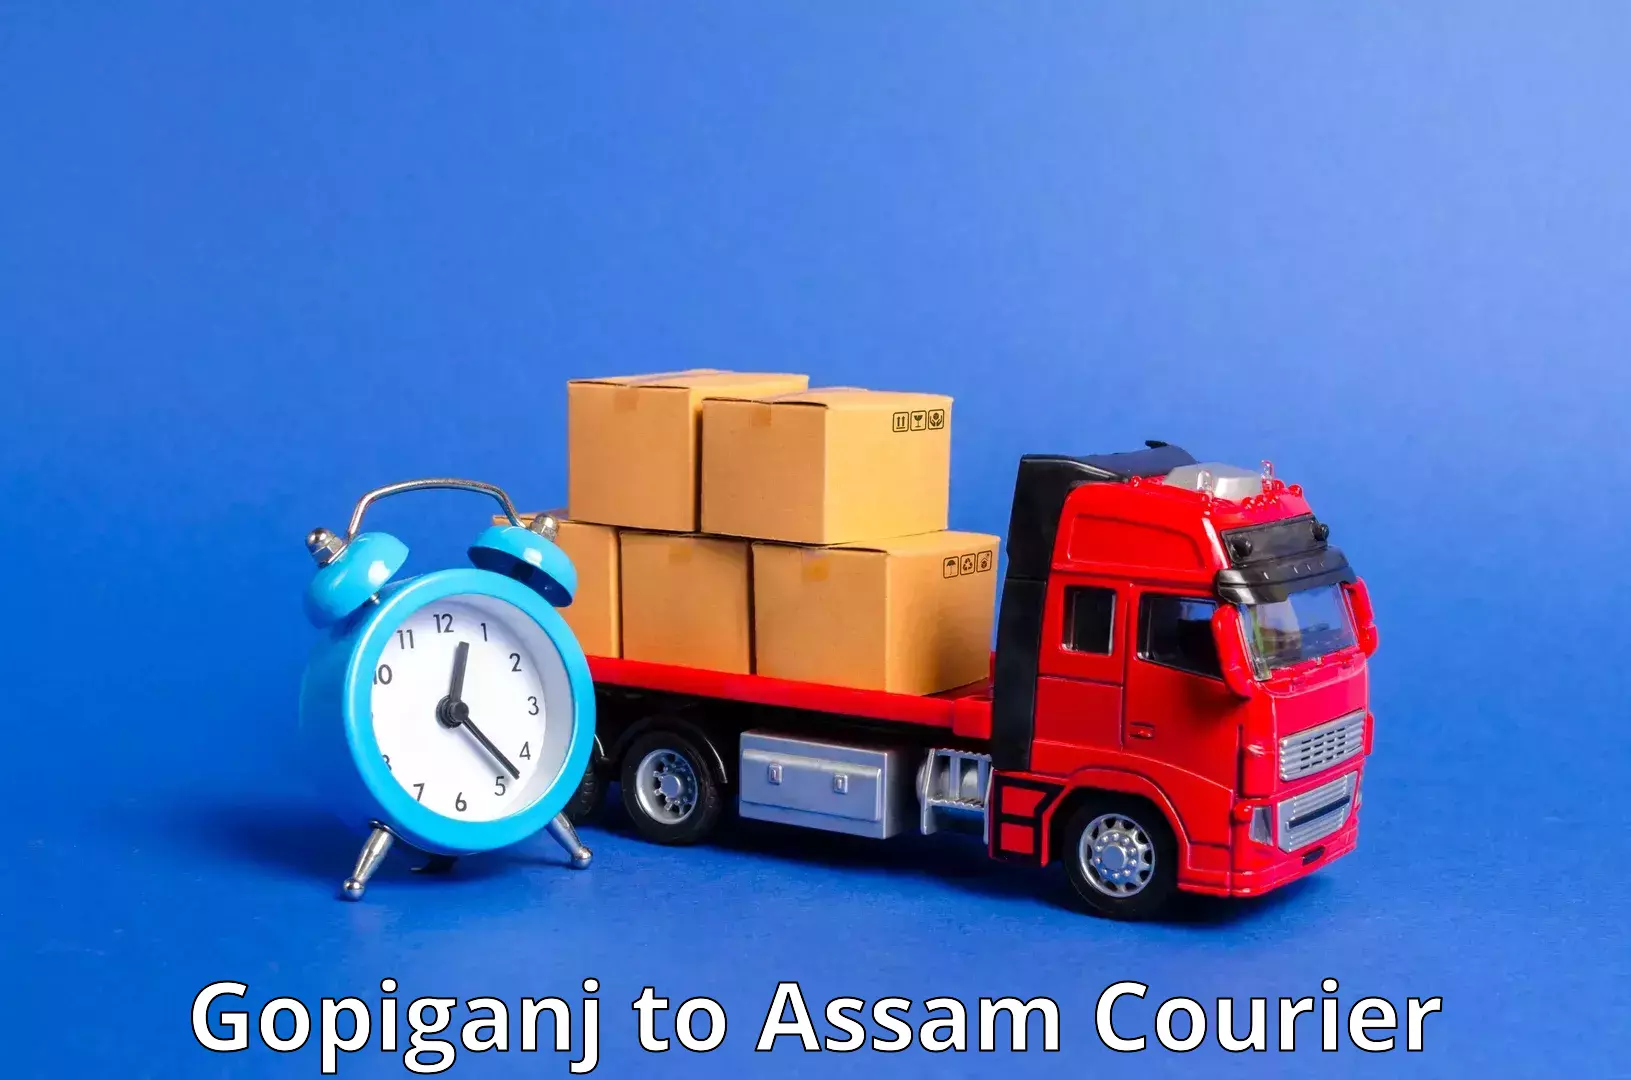 Overnight delivery services Gopiganj to Silchar